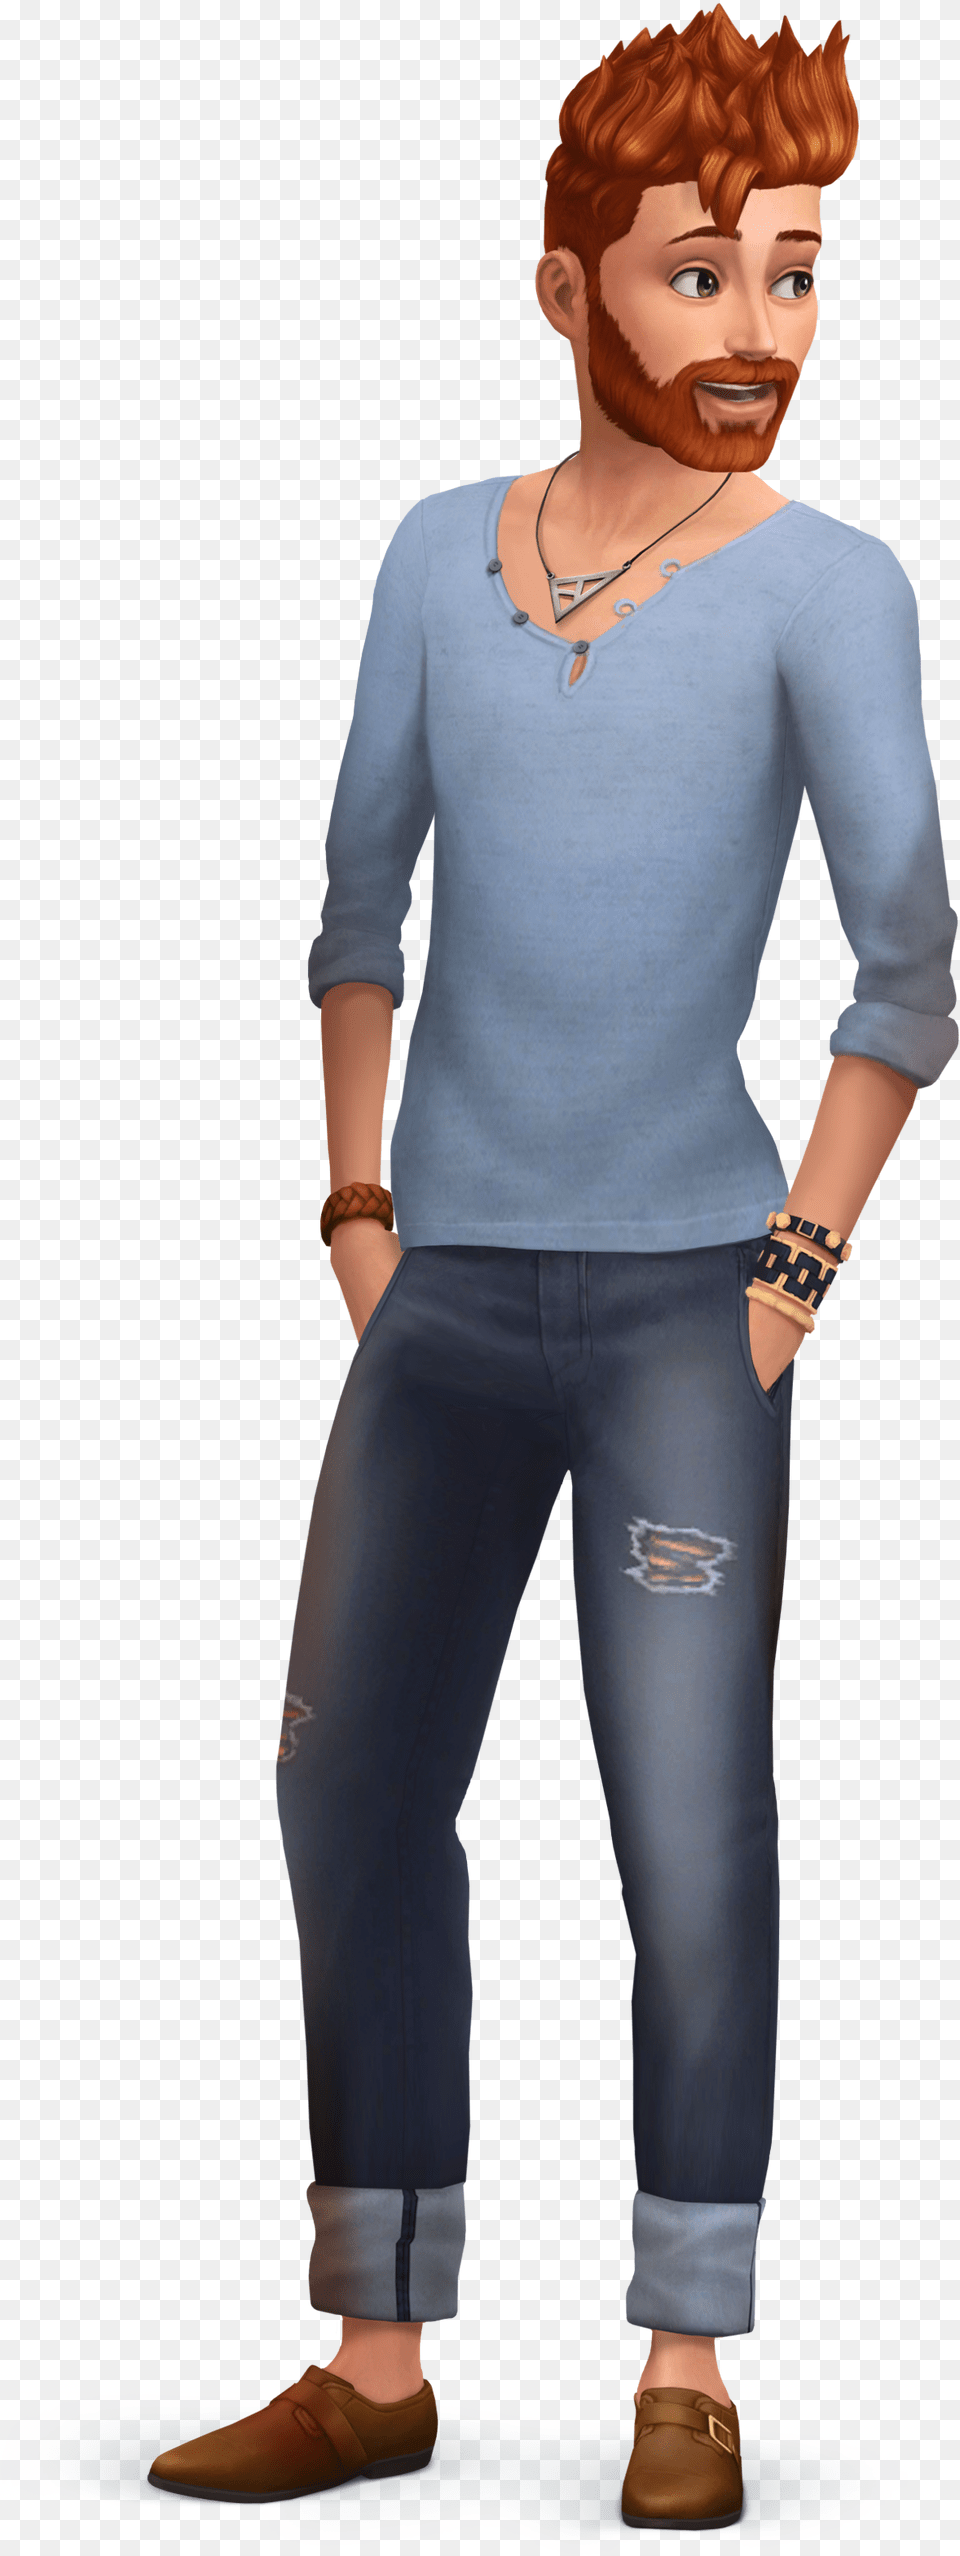 The Sims Characters Transparent Spandex, Pants, Long Sleeve, Clothing, Sleeve Png